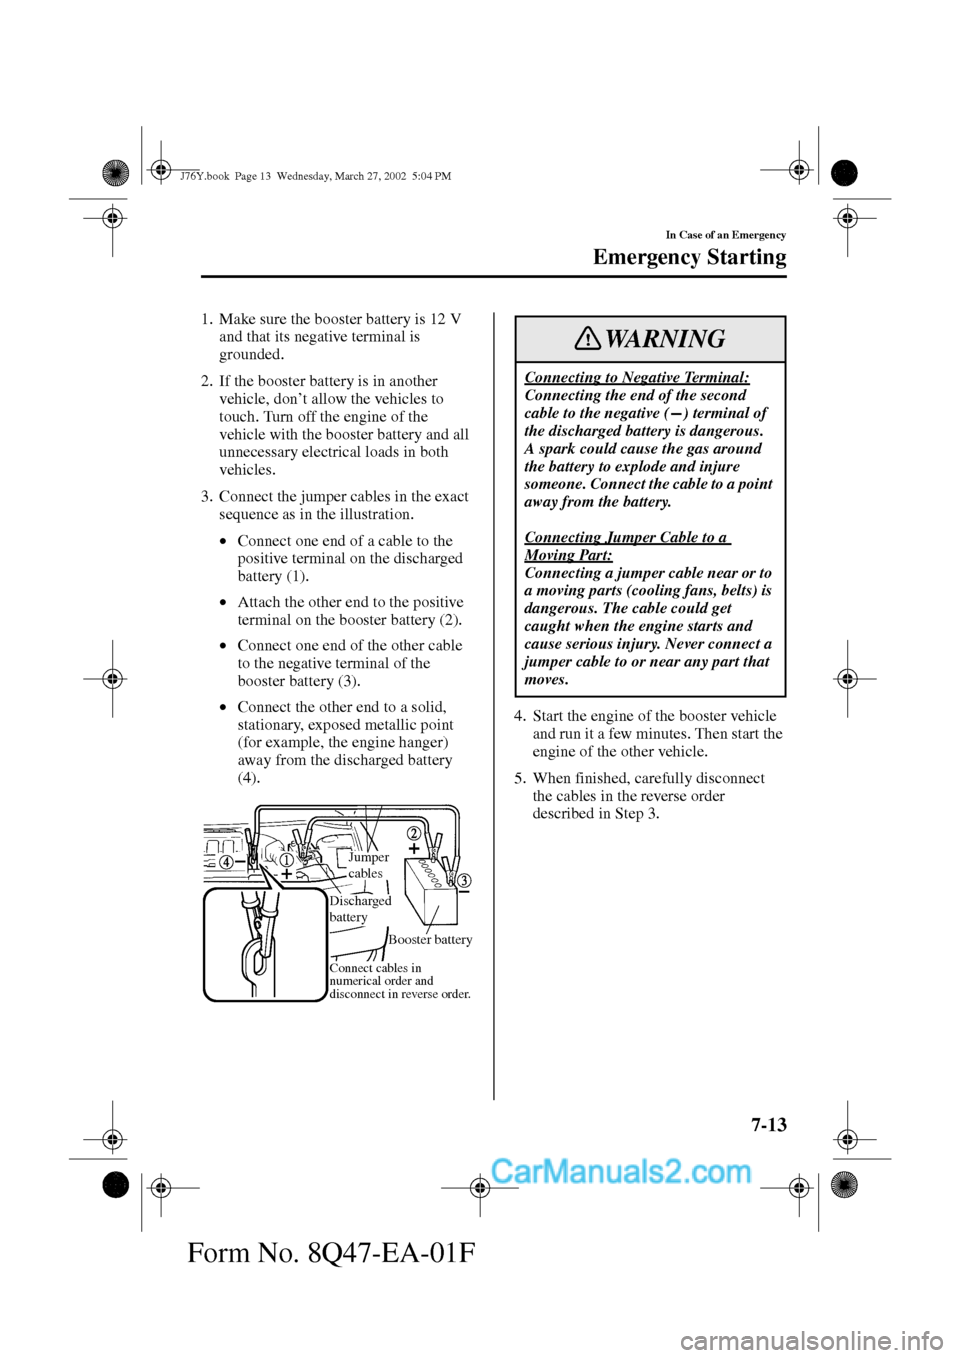 MAZDA MODEL MILLENIA 2002  Owners Manual (in English) 7-13
In Case of an Emergency
Emergency Starting
Form No. 8Q47-EA-01F
1. Make sure the booster battery is 12 V 
and that its negative terminal is 
grounded.
2. If the booster battery is in another 
veh